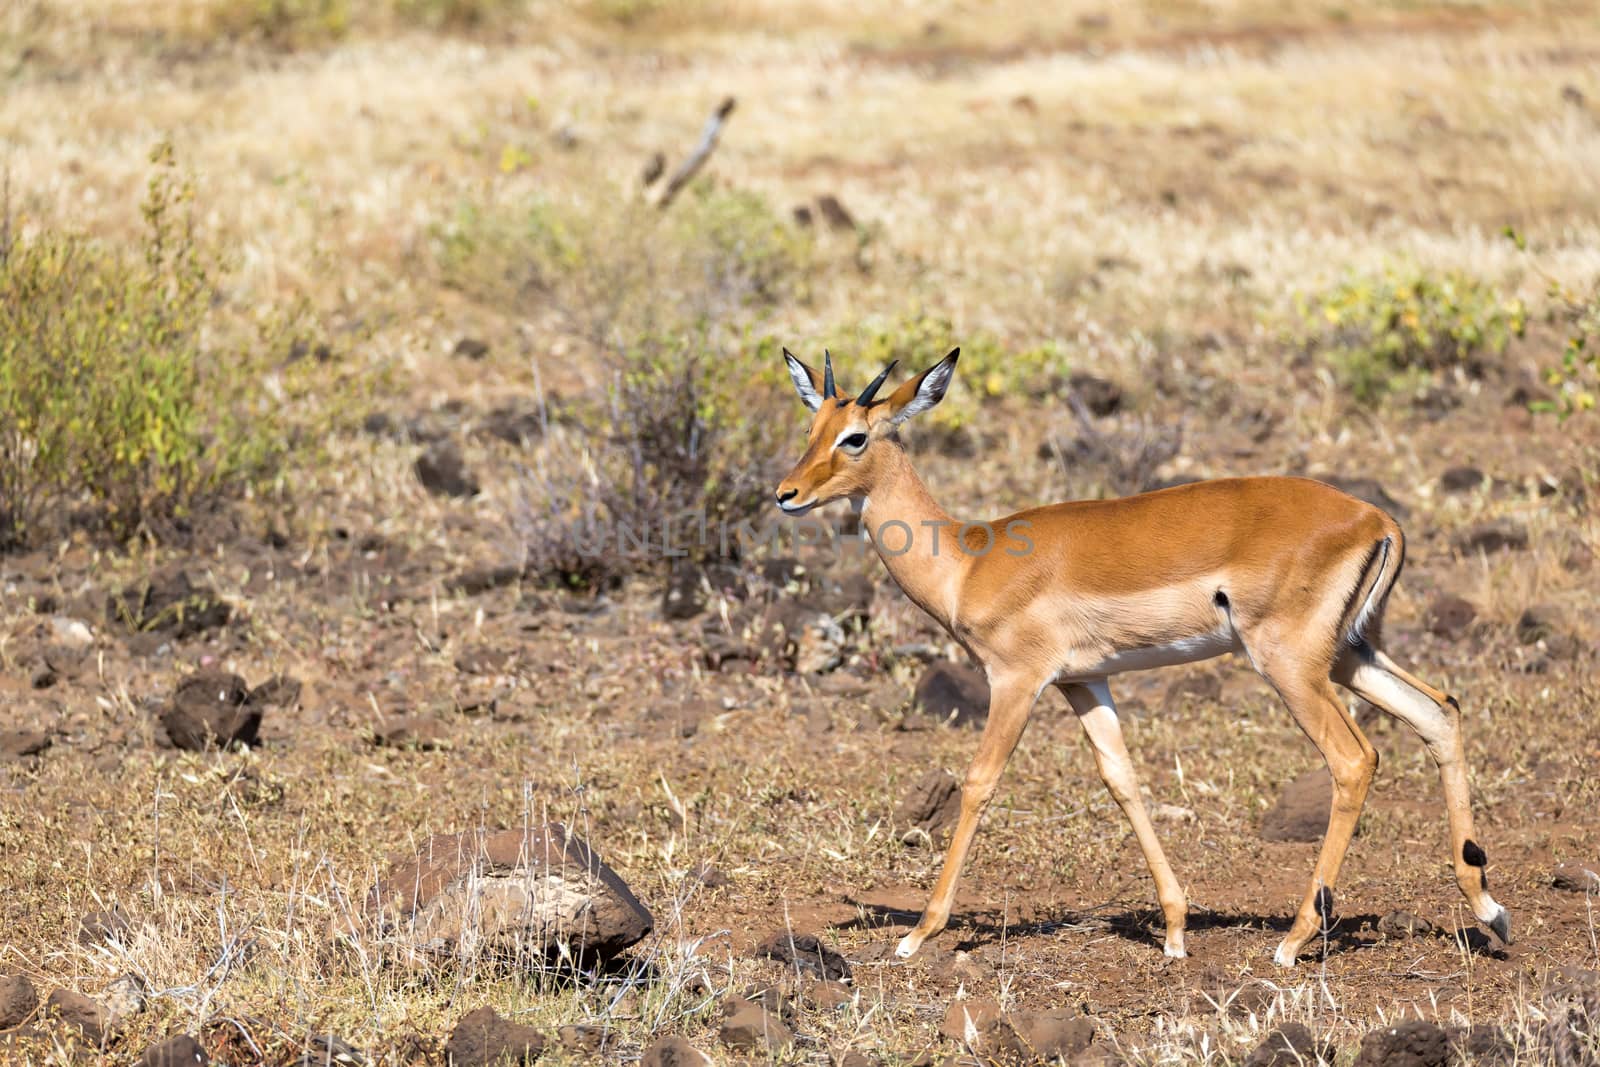 An antelope in the middle of the savannah of Kenya